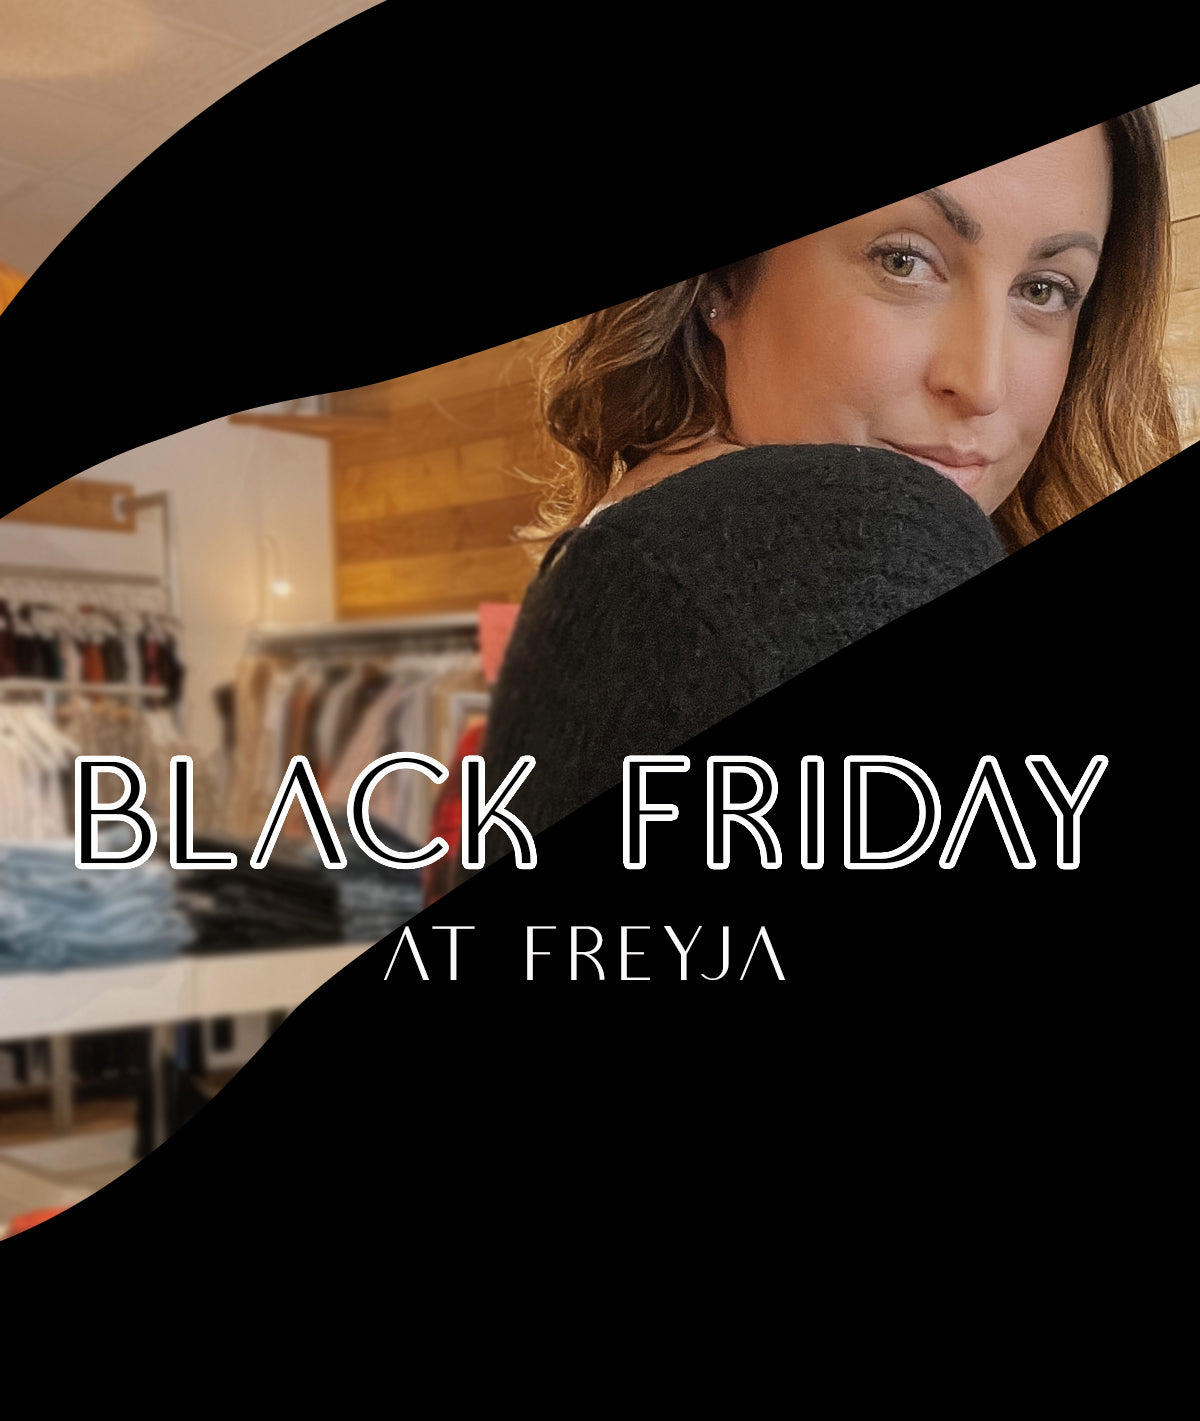 Black Friday Comes Early for Freyja